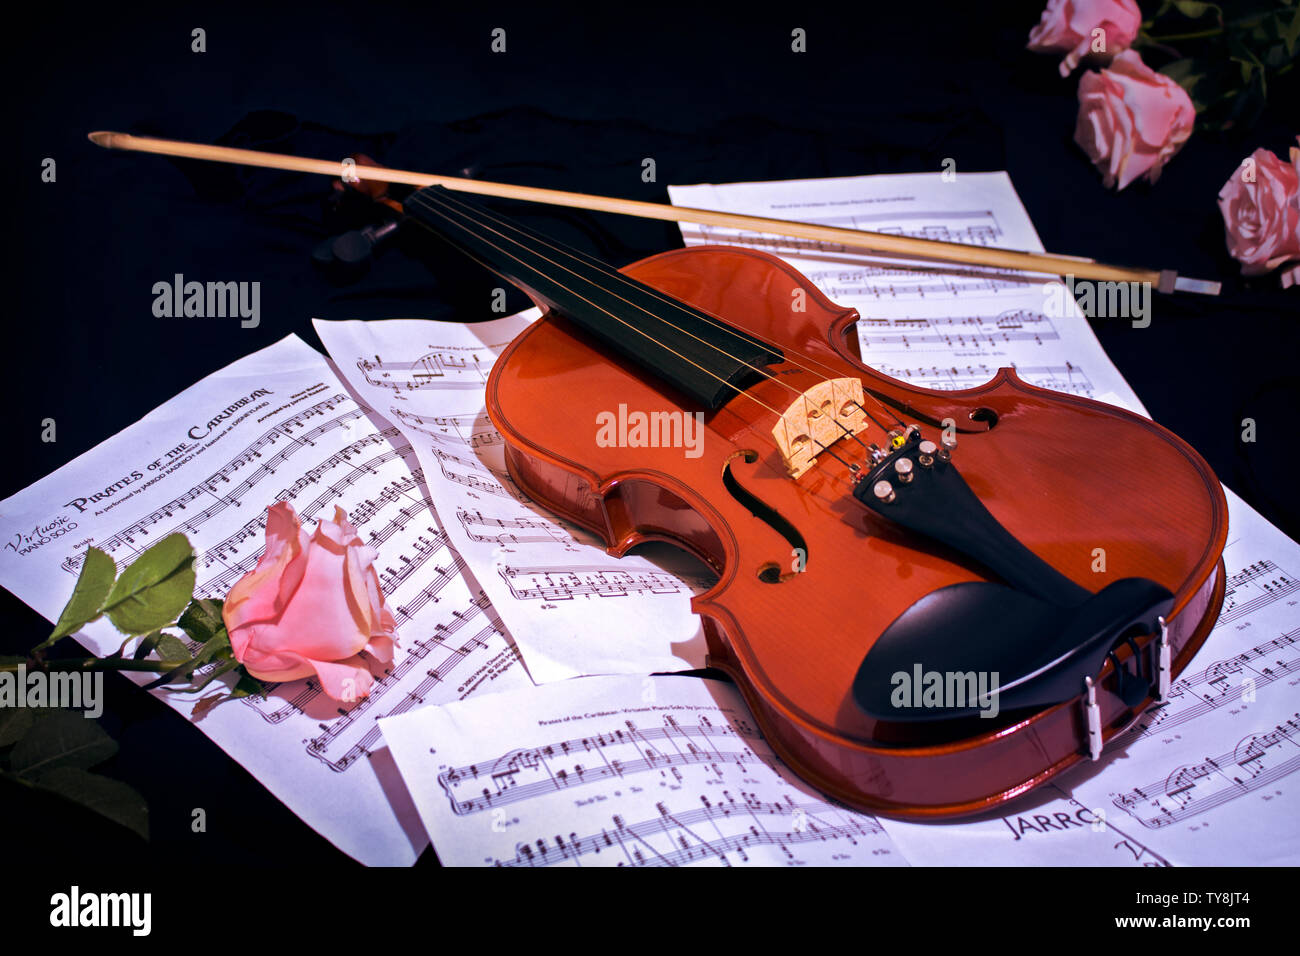 Violin lied above music sheet Stock Photo